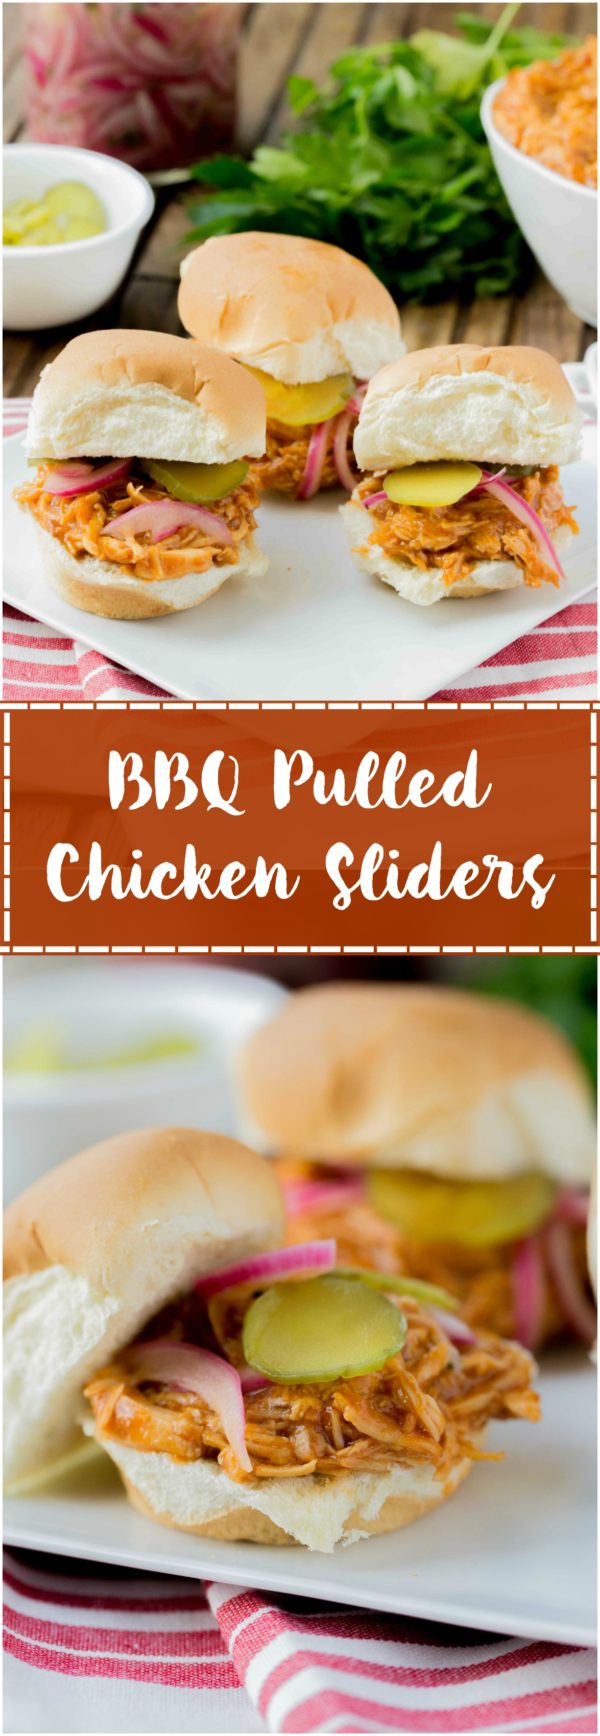 BBQ Pulled Chicken Sliders are packed with delicious flavor! The chicken is slow cooked with Barbecue sauce then shredded or 'pulled' and piled on top of slider rolls. Perfect for a busy night or a fun gathering!